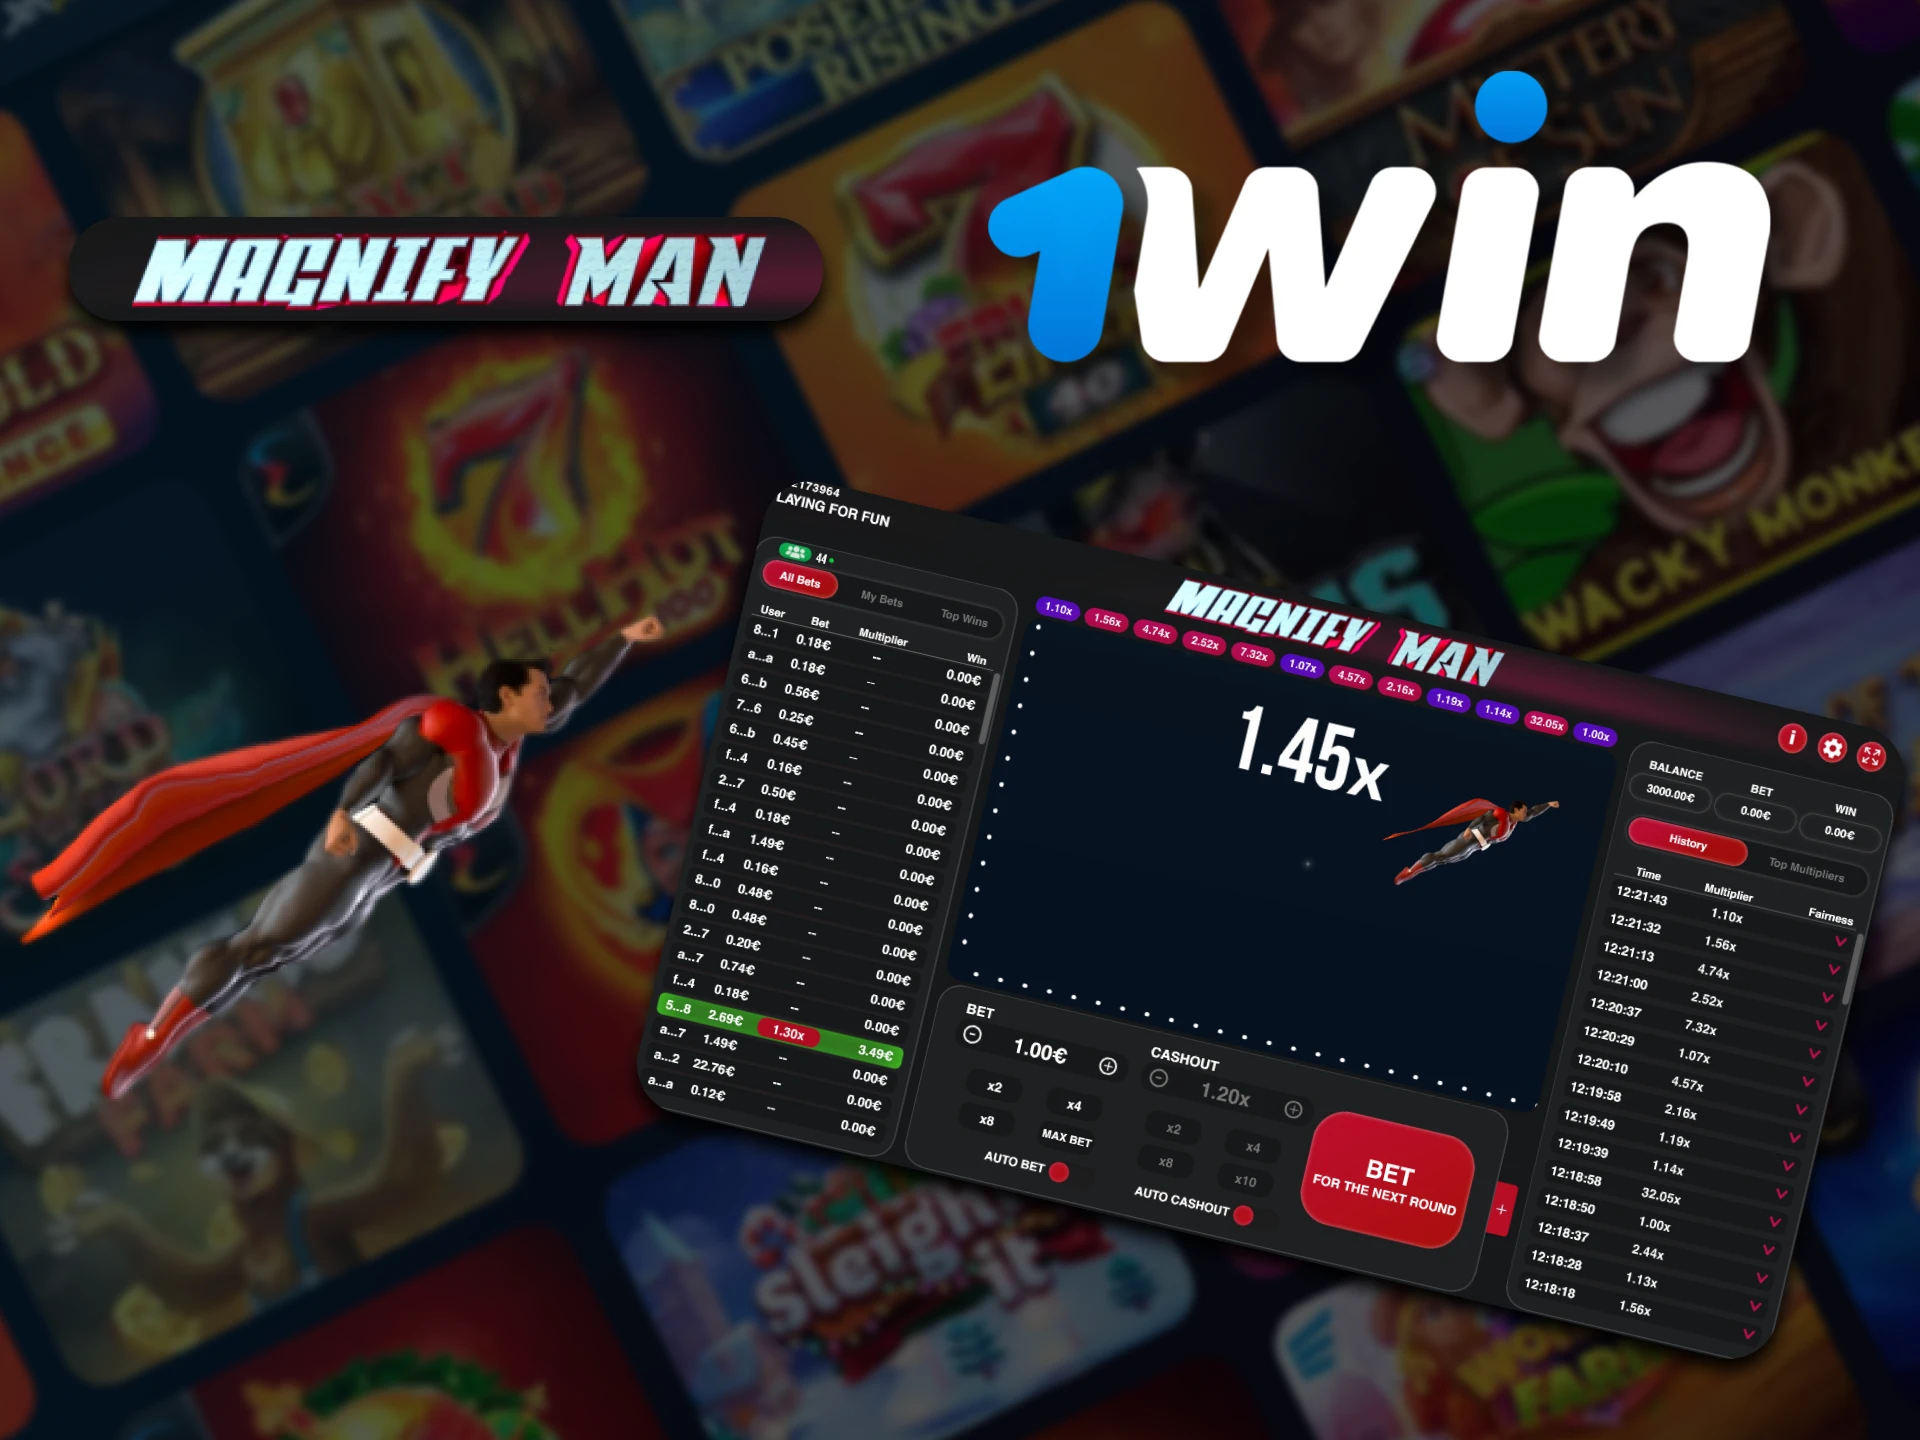 Play Magnify Man at 1Win Casino with 96% RTP.